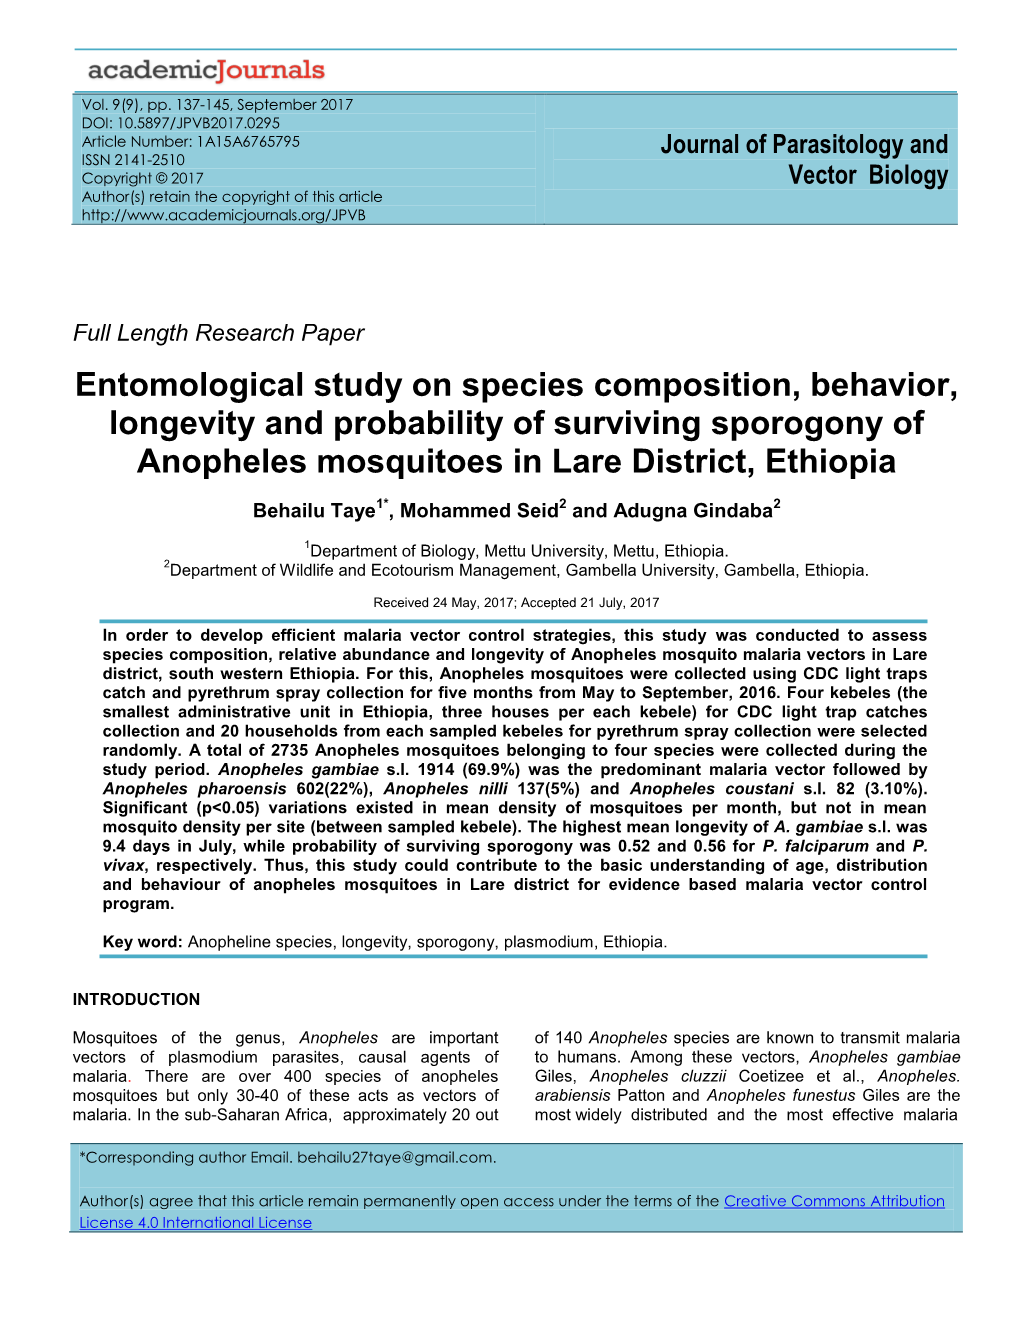 Entomological Study on Species Composition, Behavior, Longevity and Probability of Surviving Sporogony of Anopheles Mosquitoes in Lare District, Ethiopia